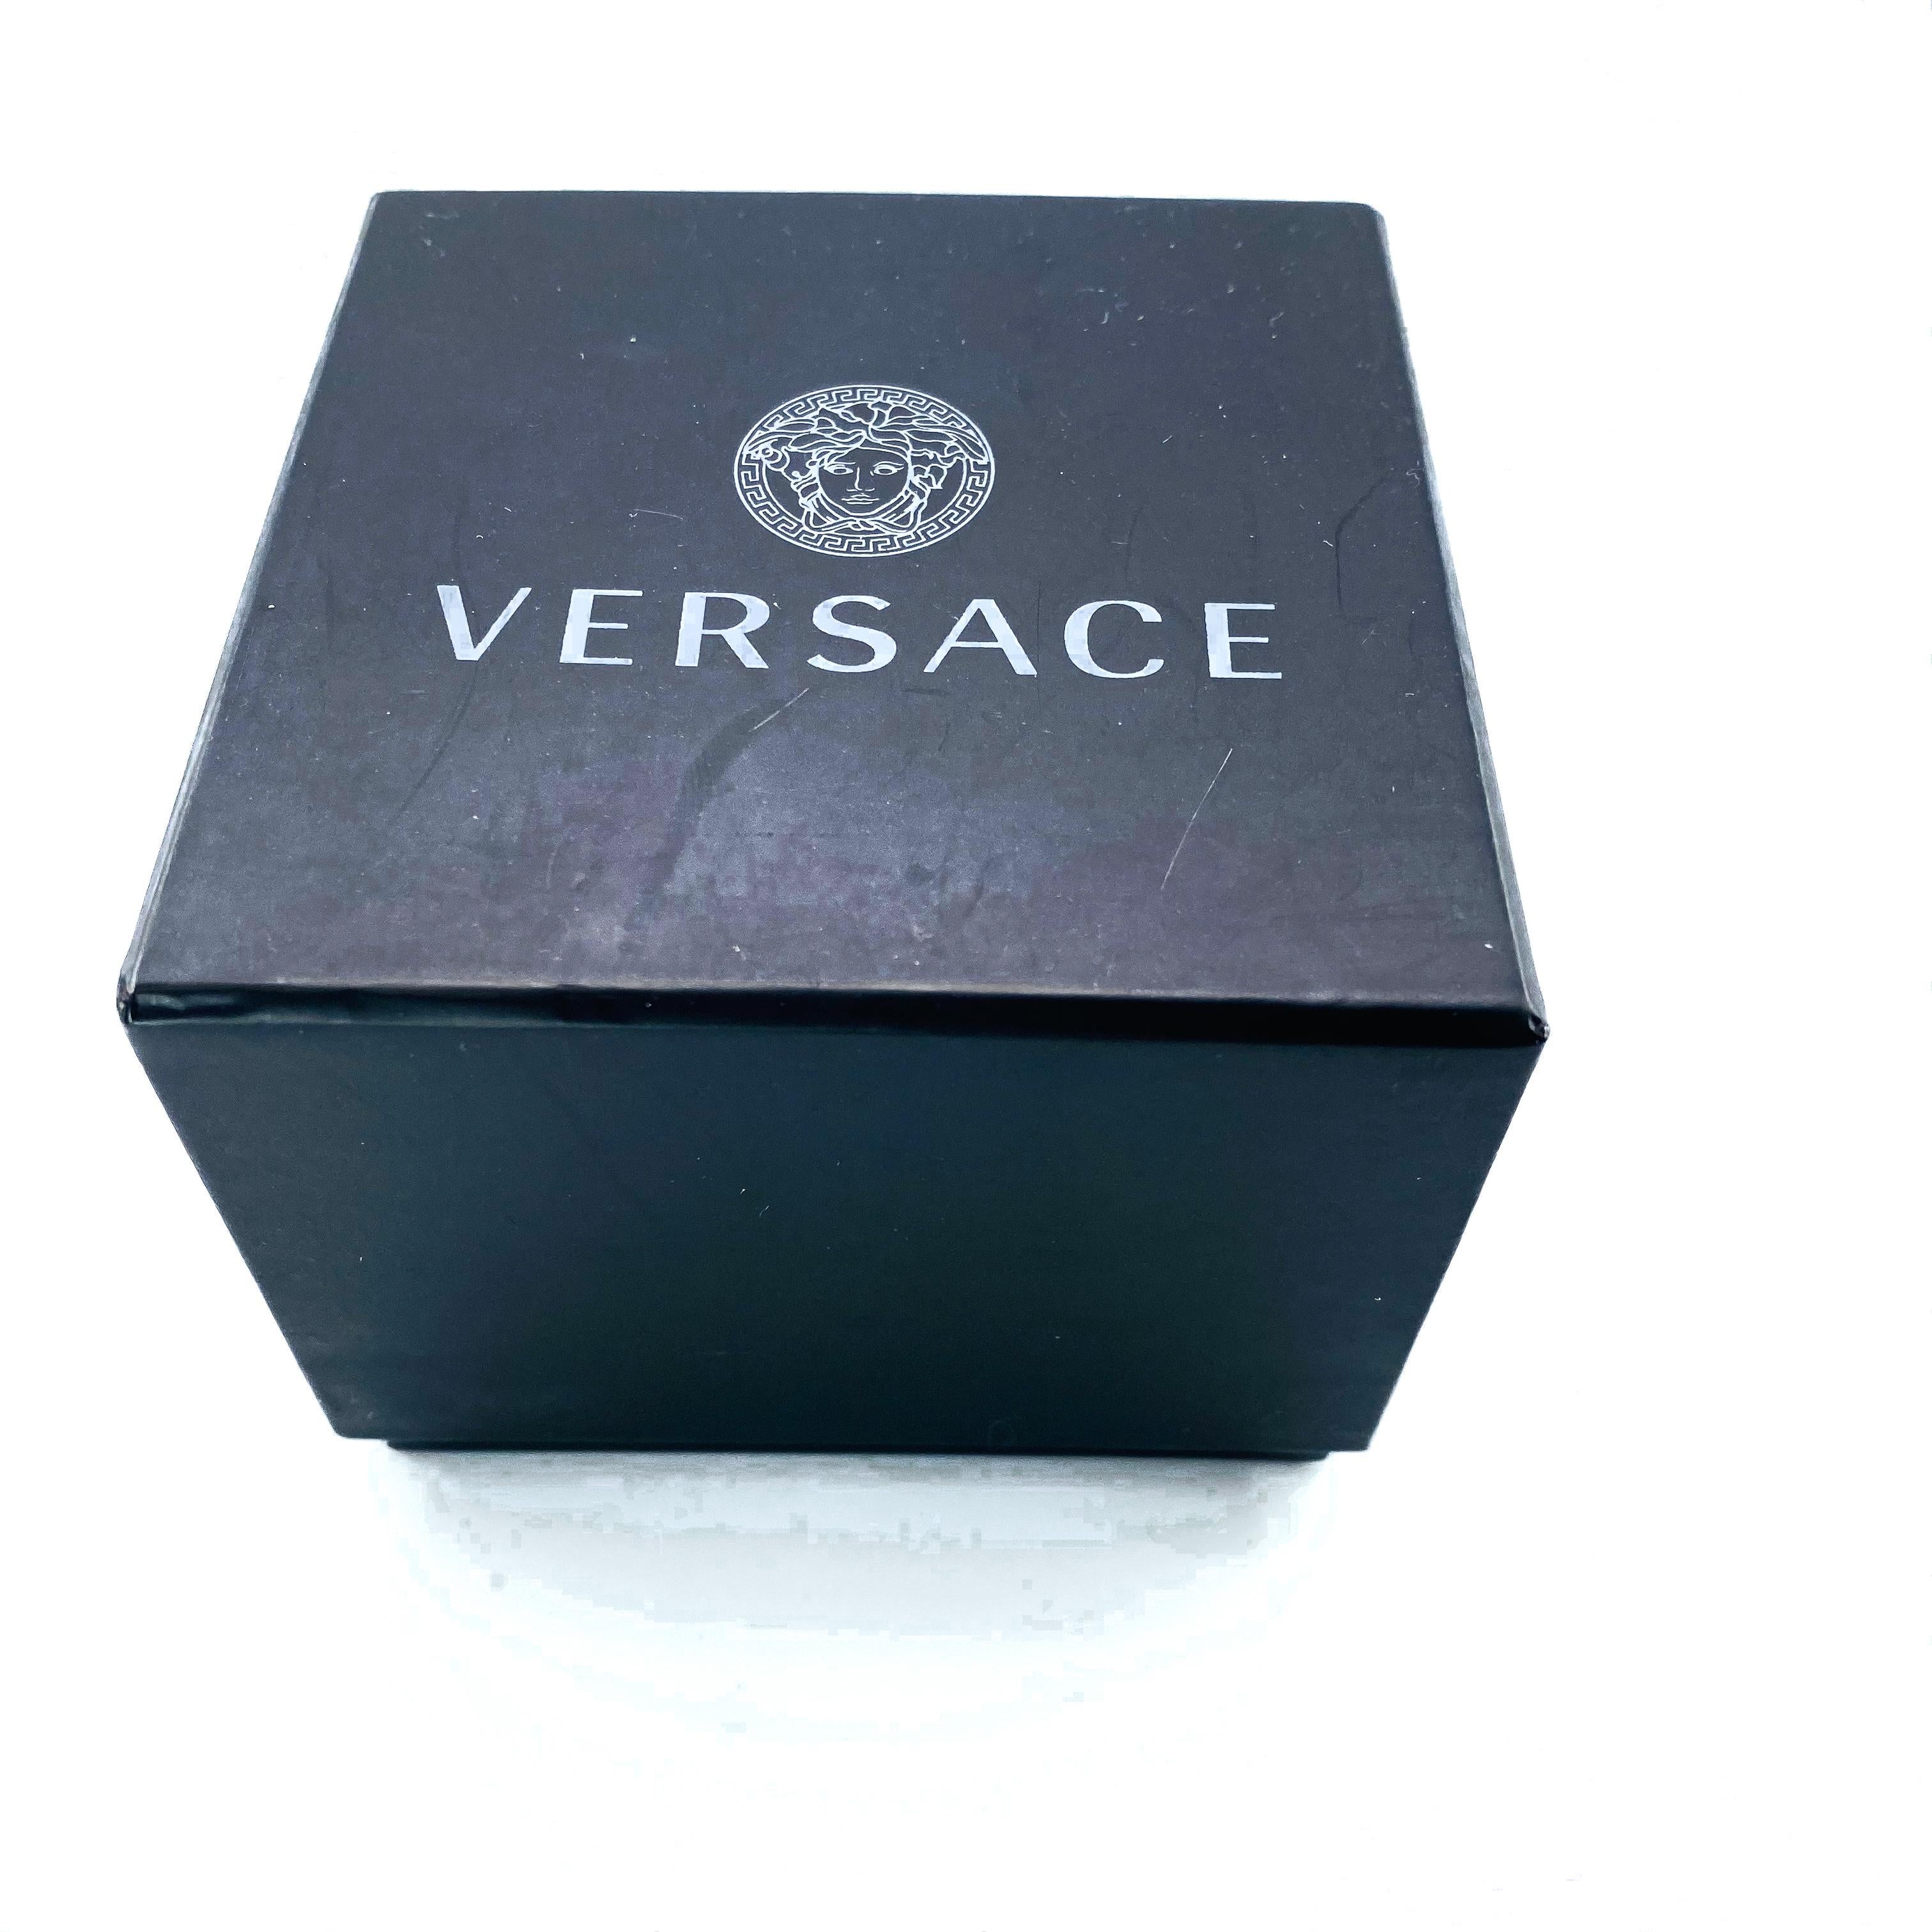 Versace Vintage Y2K Medusa Earrings
Incredible medusa statement earrings from the iconic Versace

Detail
-Made in Italy
-Crafted from high quality gold plated metal
-Featuring the iconic Versace Medusa 

Size & Fit
-Measure approx 1 inch